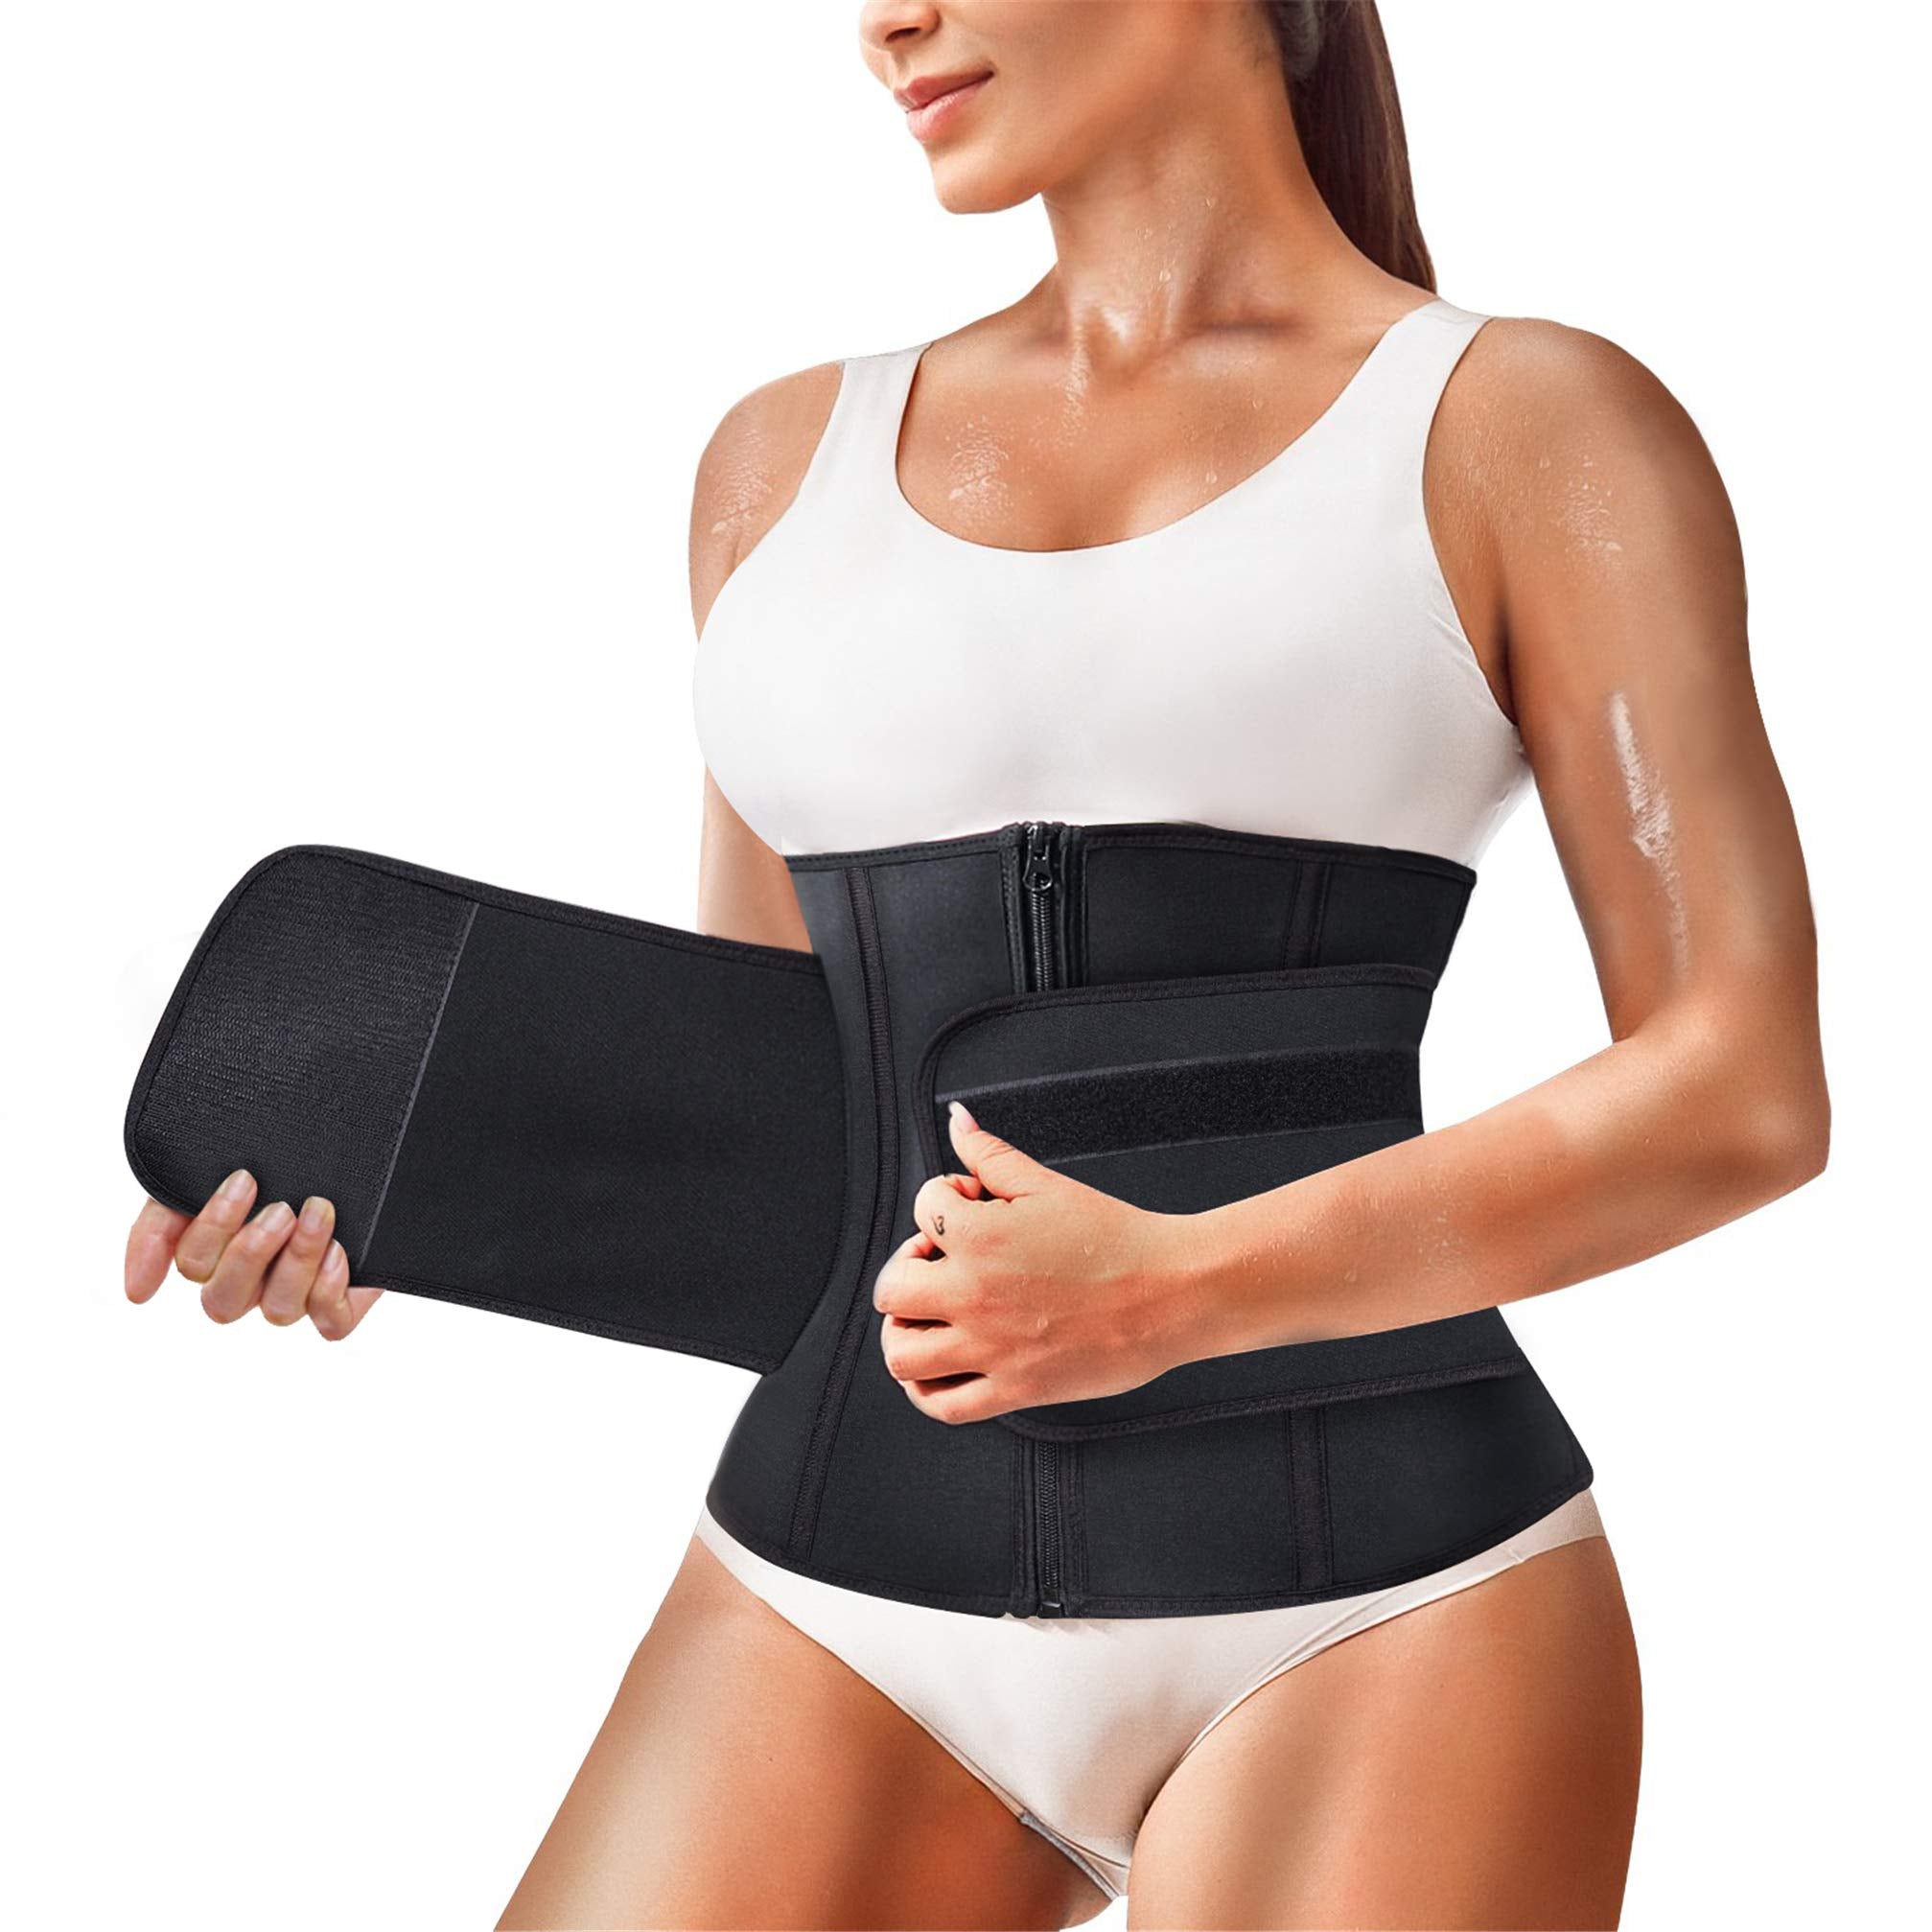 Chumian Women Waist Trainer Trimmer Belt Slimming Body Shaper Cincher for Weight Loss Adjustable Belly Band Sweat Workout Girdle with Zipper